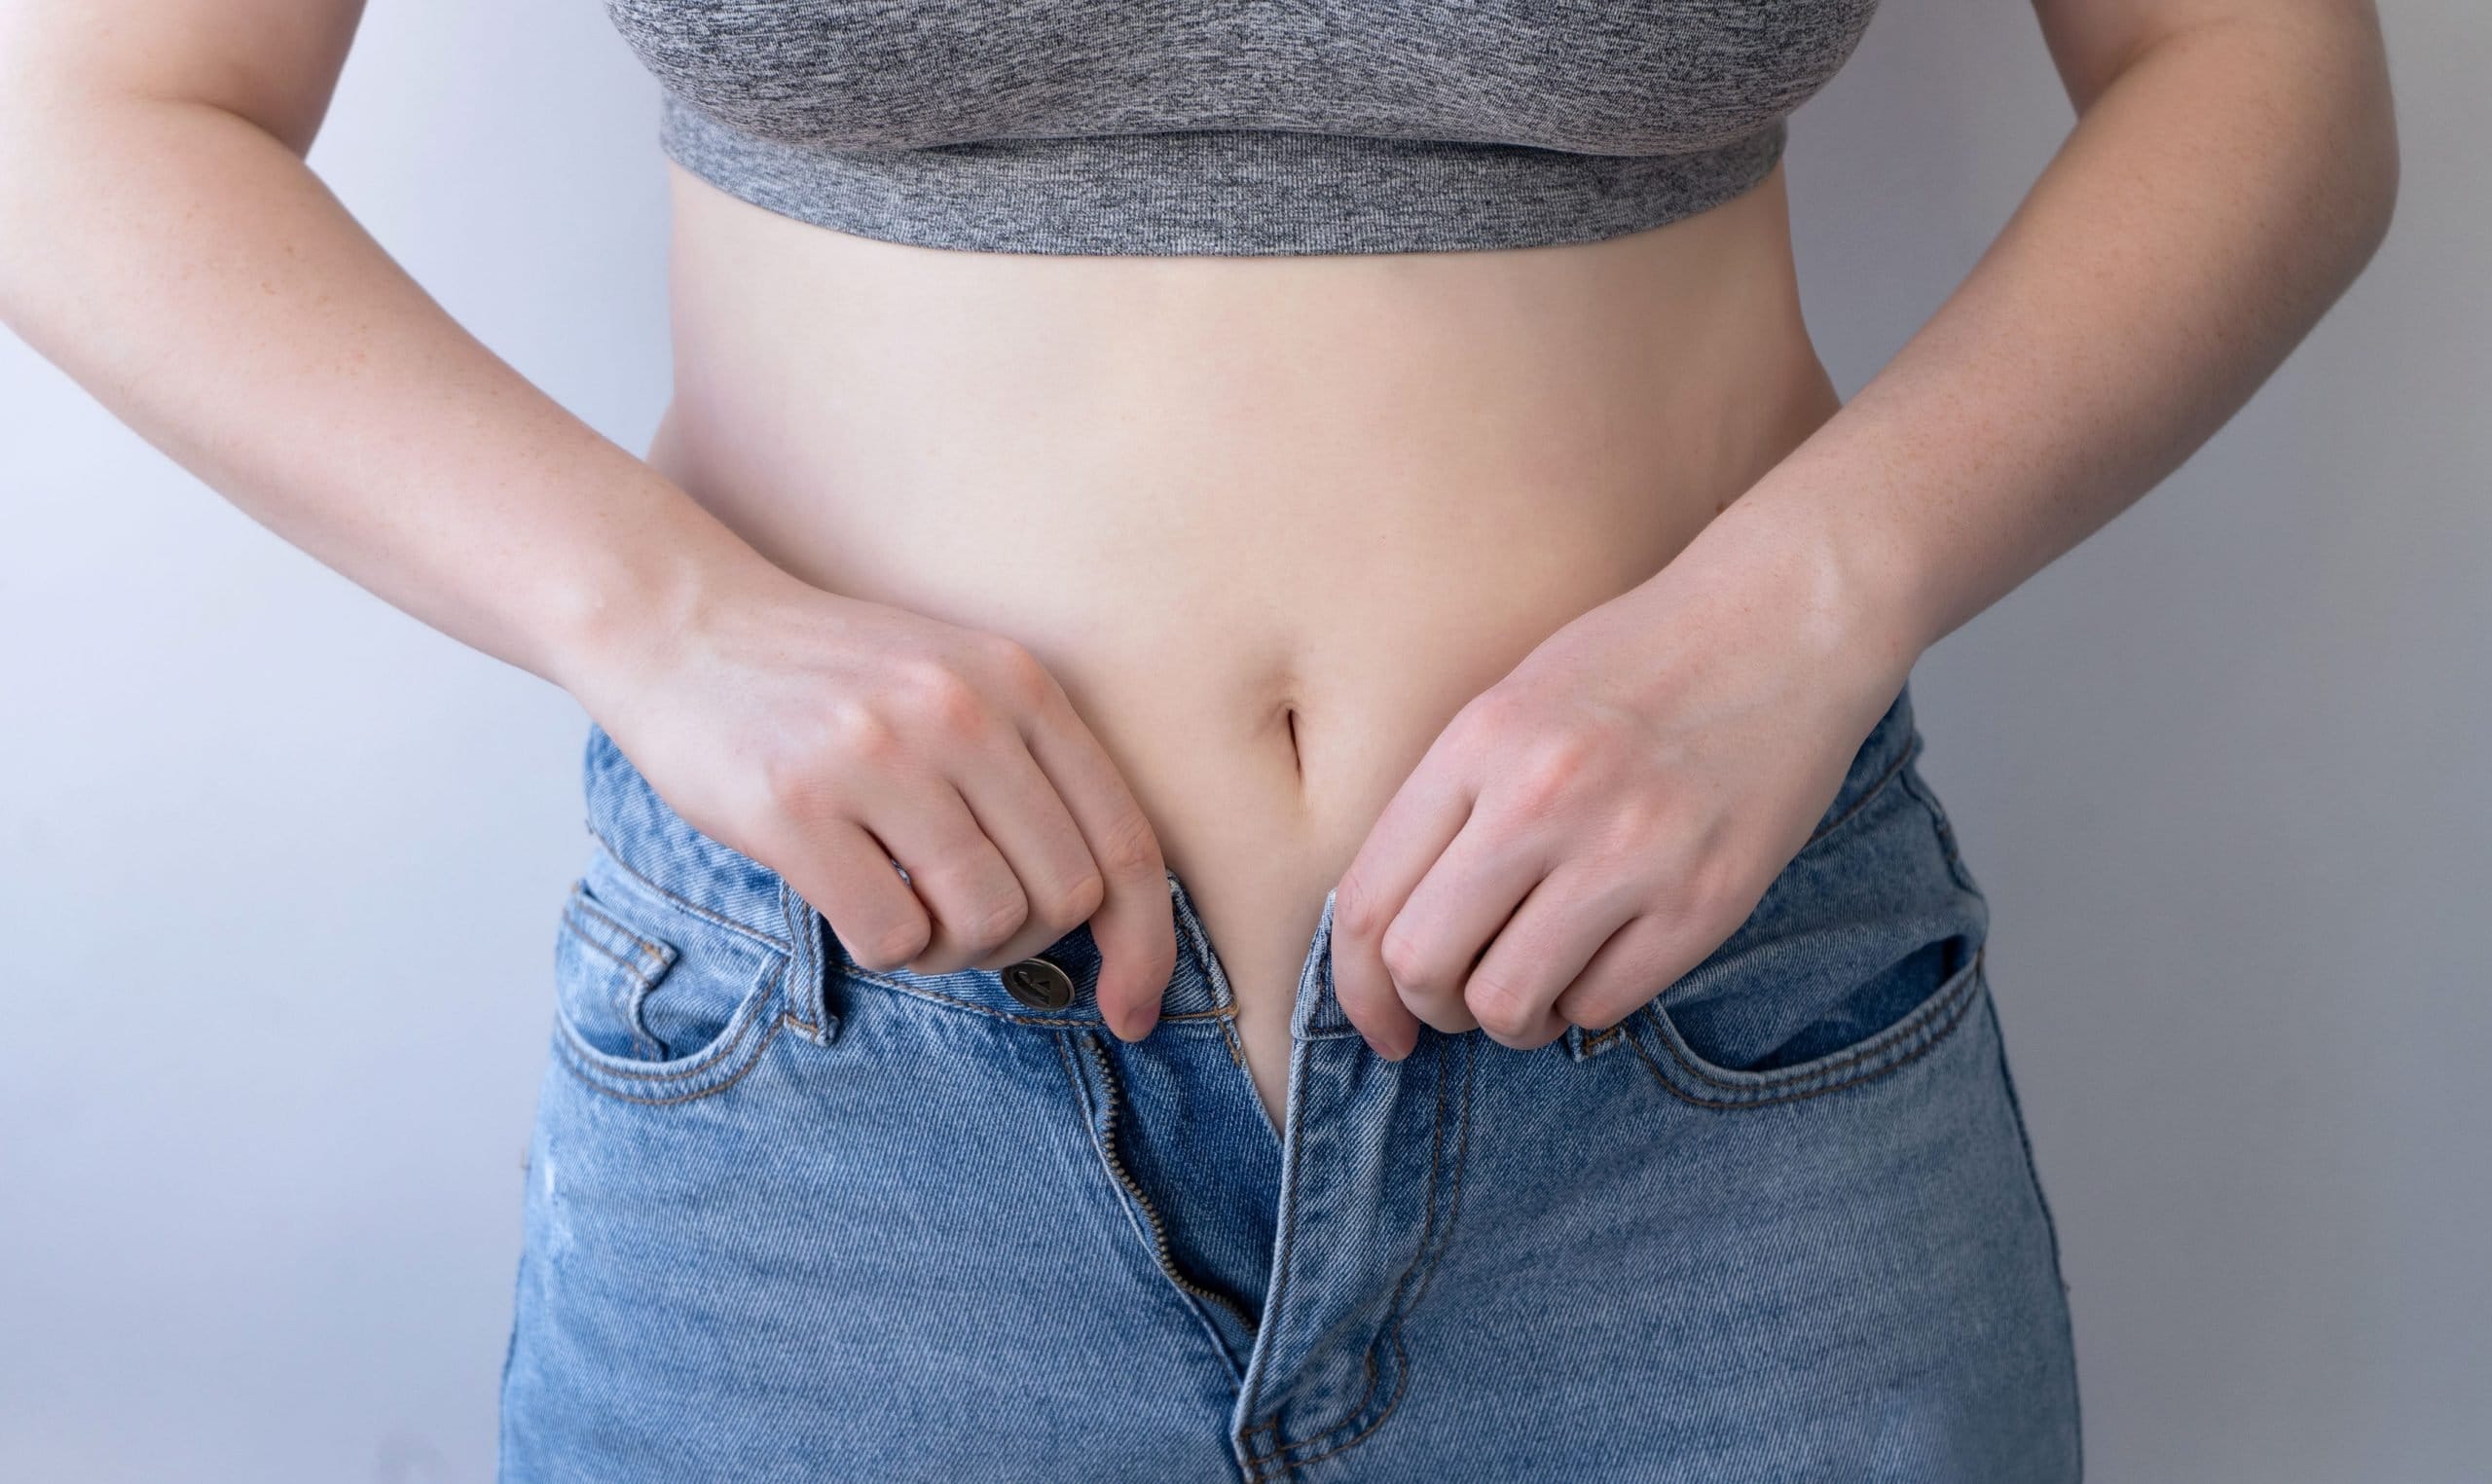 For women with big stomachs, a pair of jeans that can comfortably tuck in your belly is a must